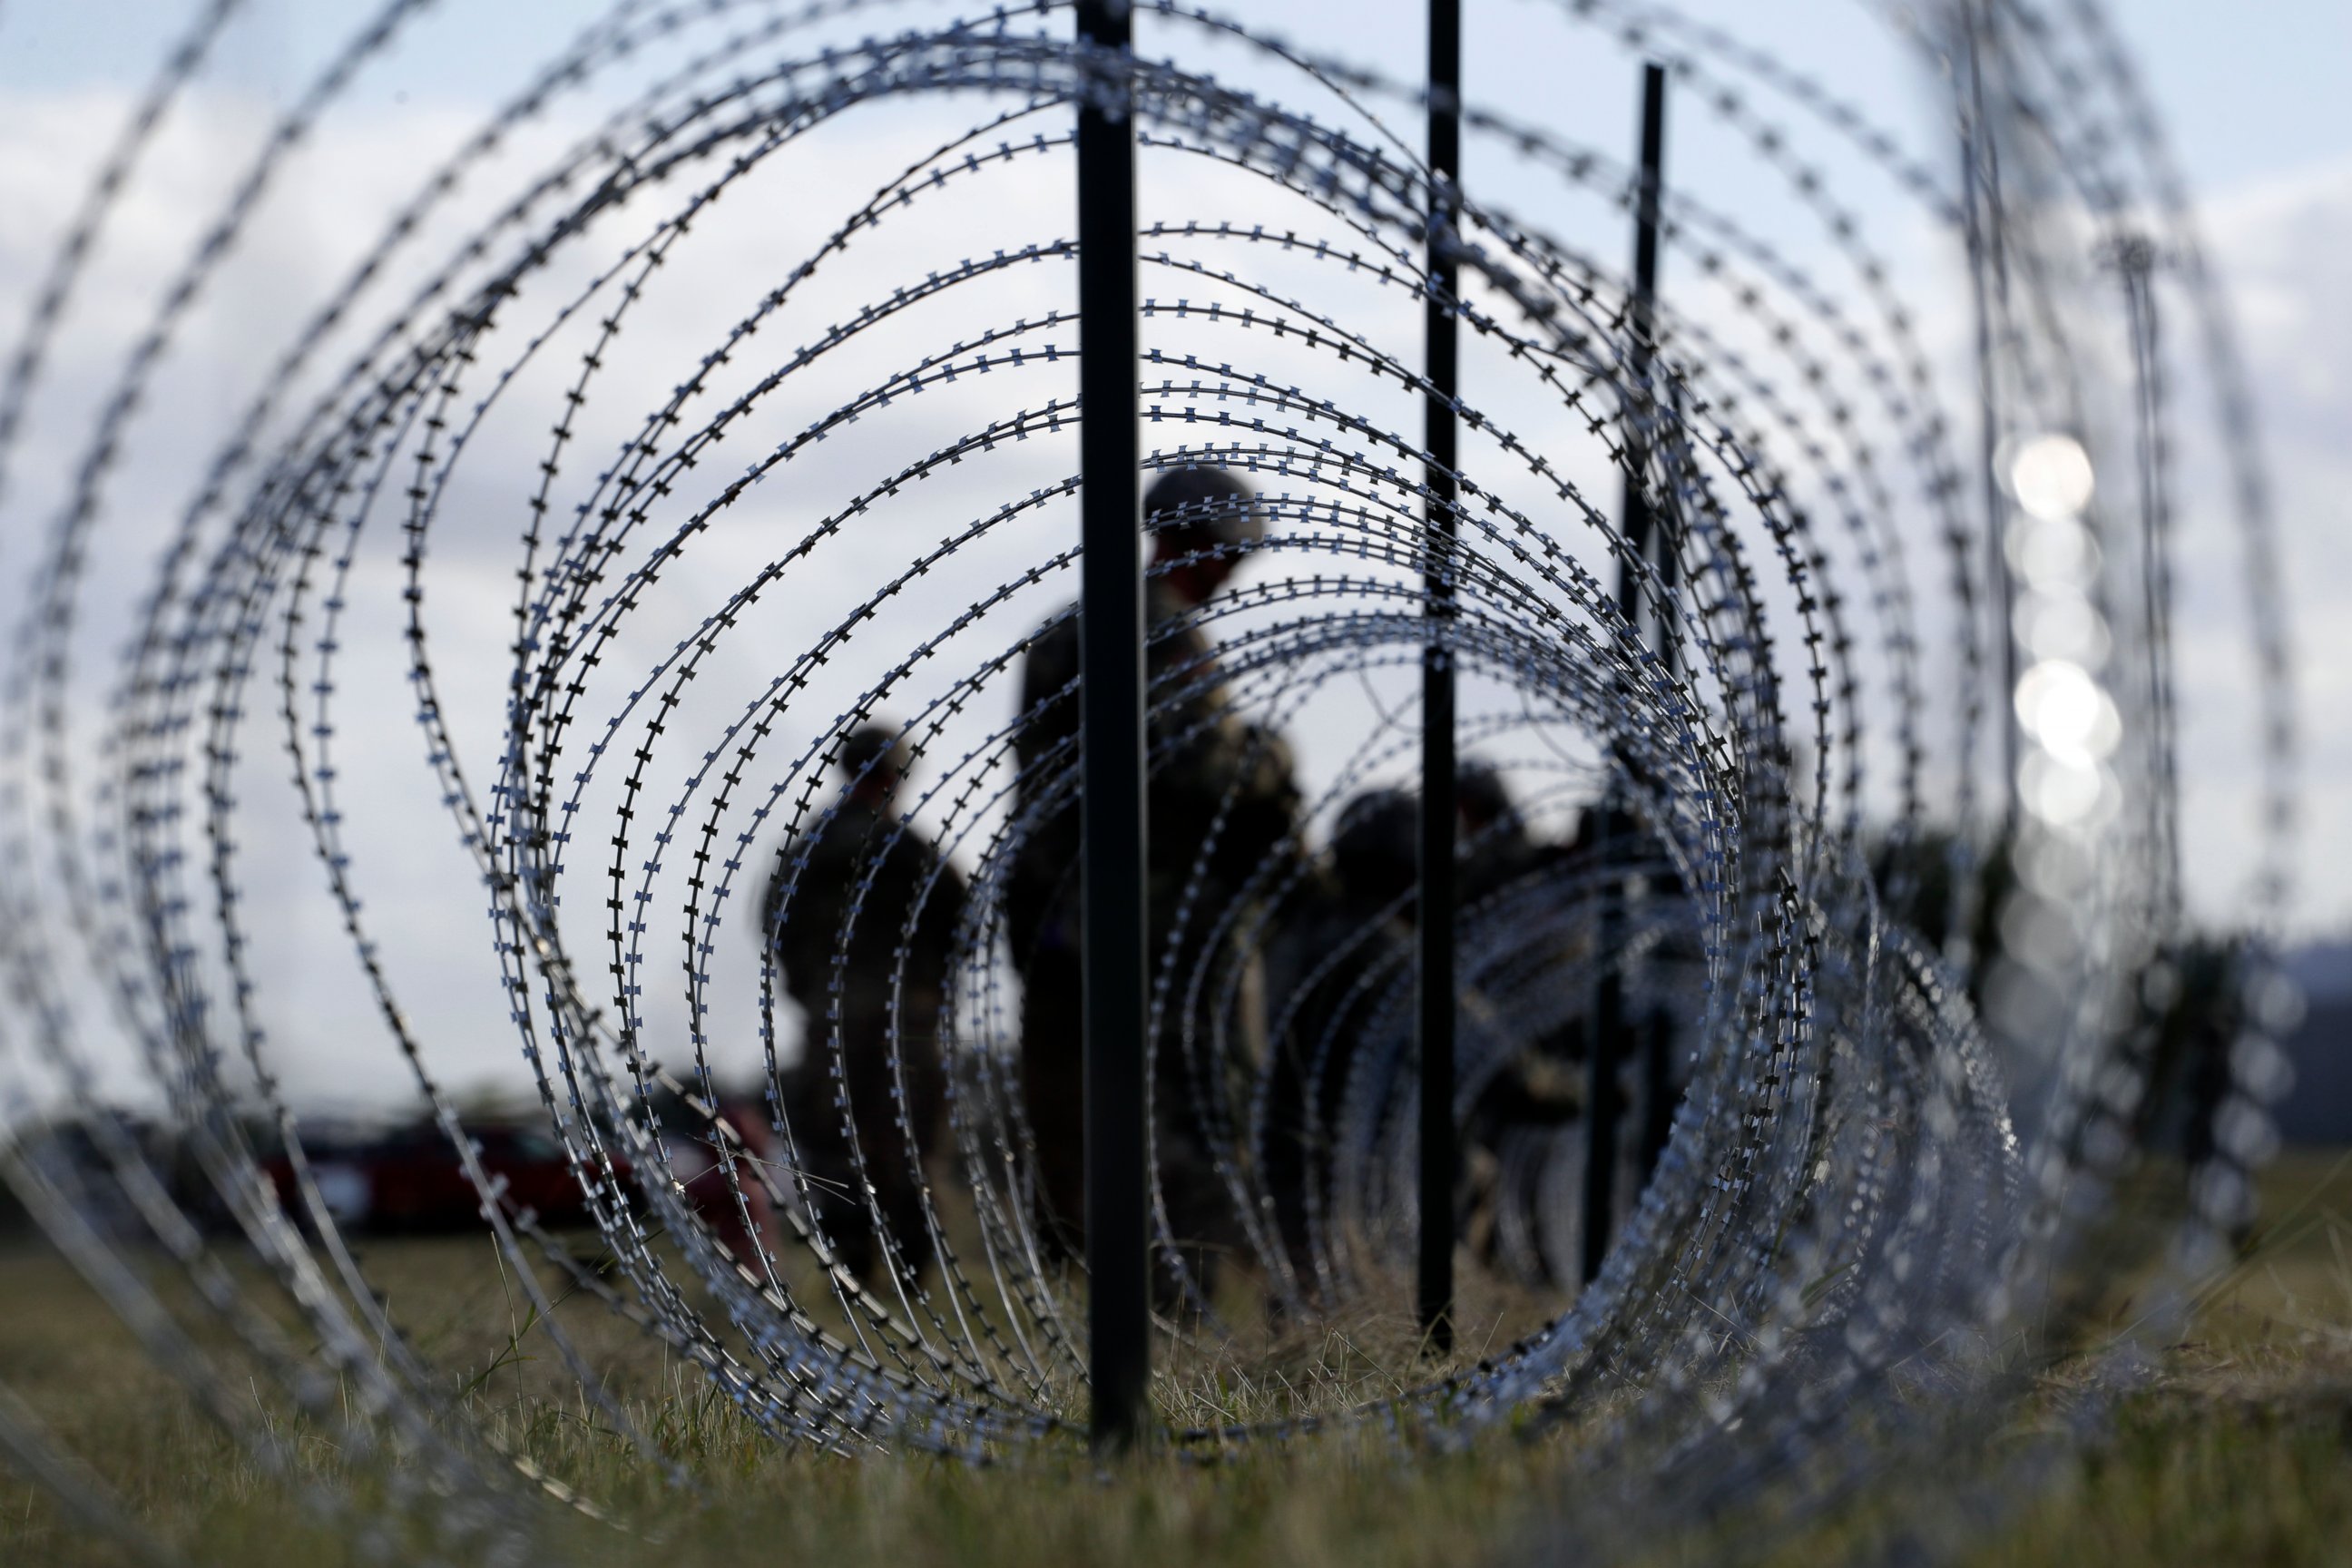 PHOTO: In this Nov. 3, 2018, file photo, members of the U.S. Army build a razor wire fence around area for tents near the U.S.-Mexico International bridge, in Donna, Texas.